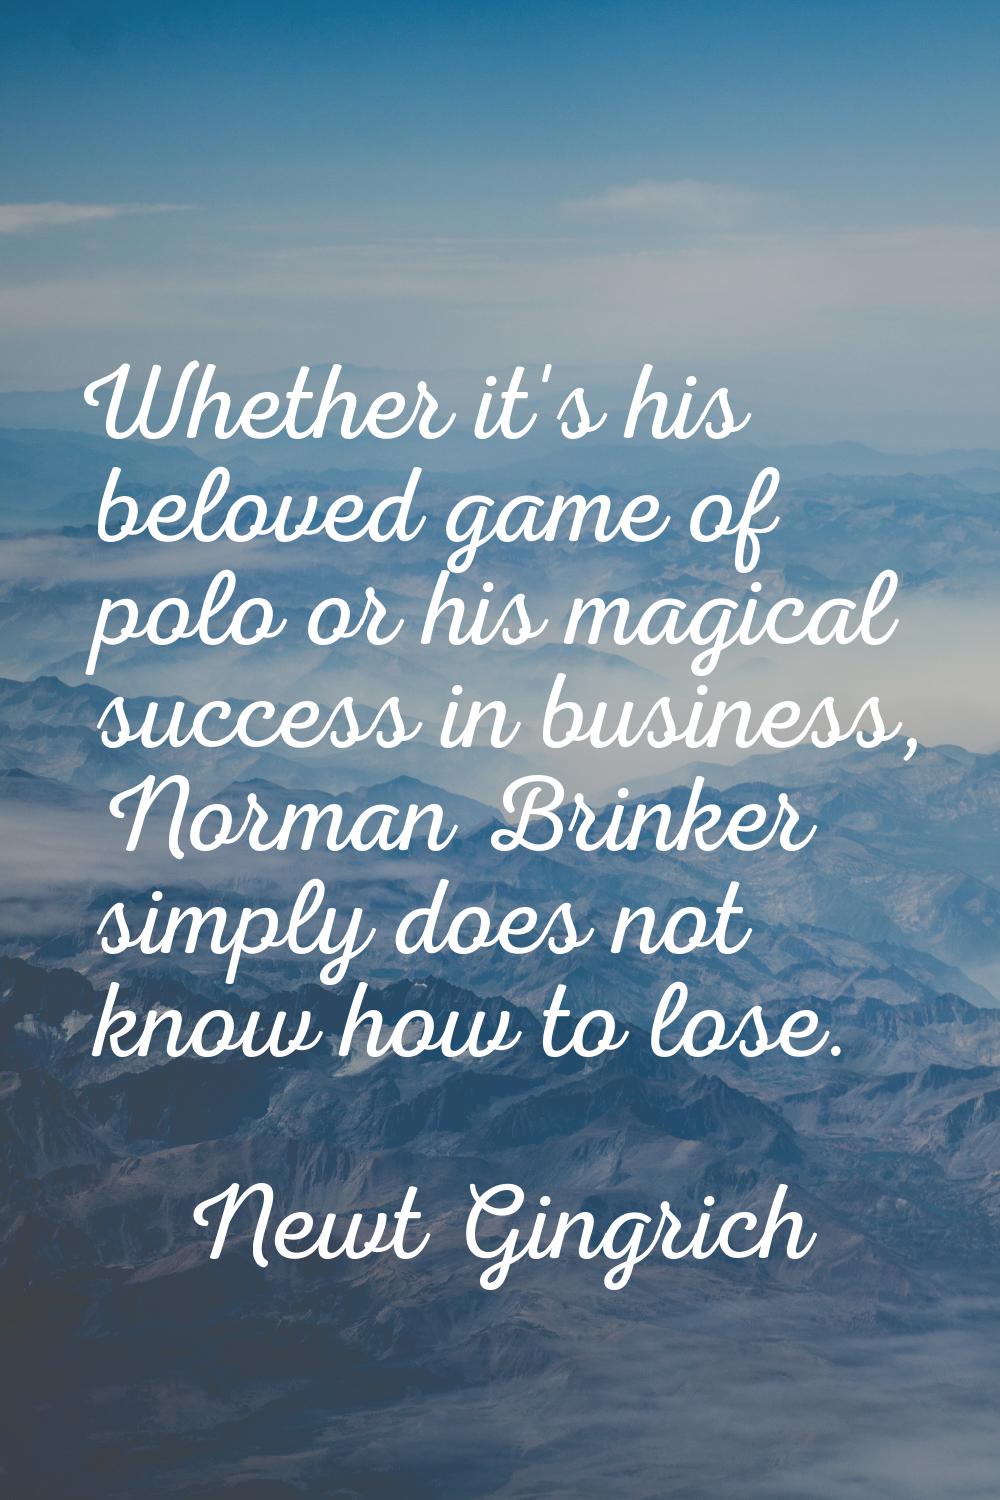 Whether it's his beloved game of polo or his magical success in business, Norman Brinker simply doe